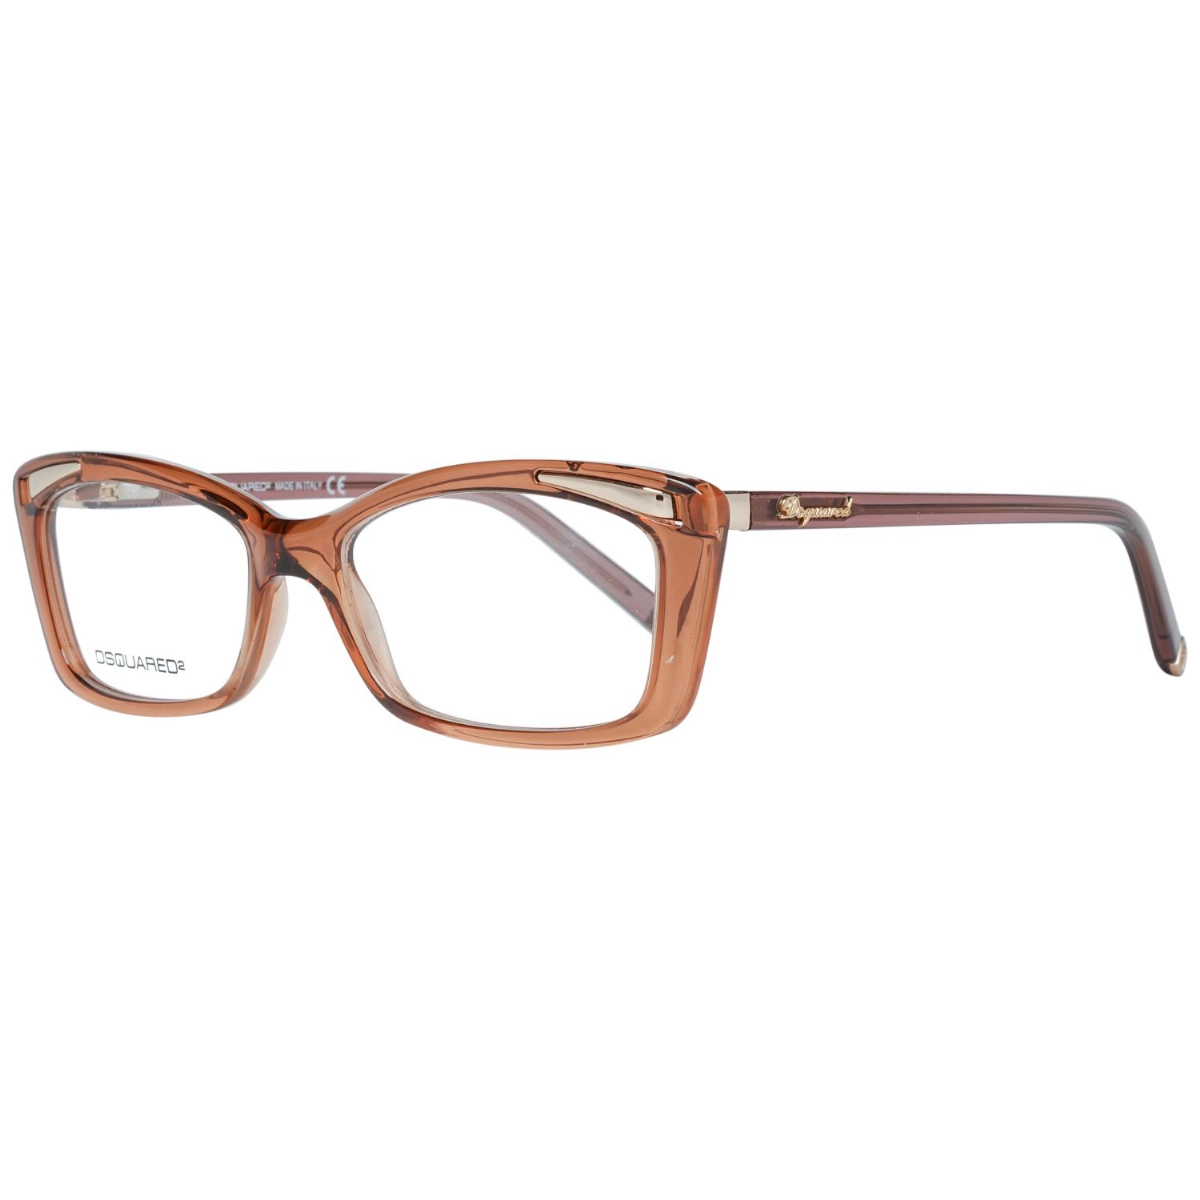 GLASSES FOR WOMAN DSQUARED2 DQ5109-047-54